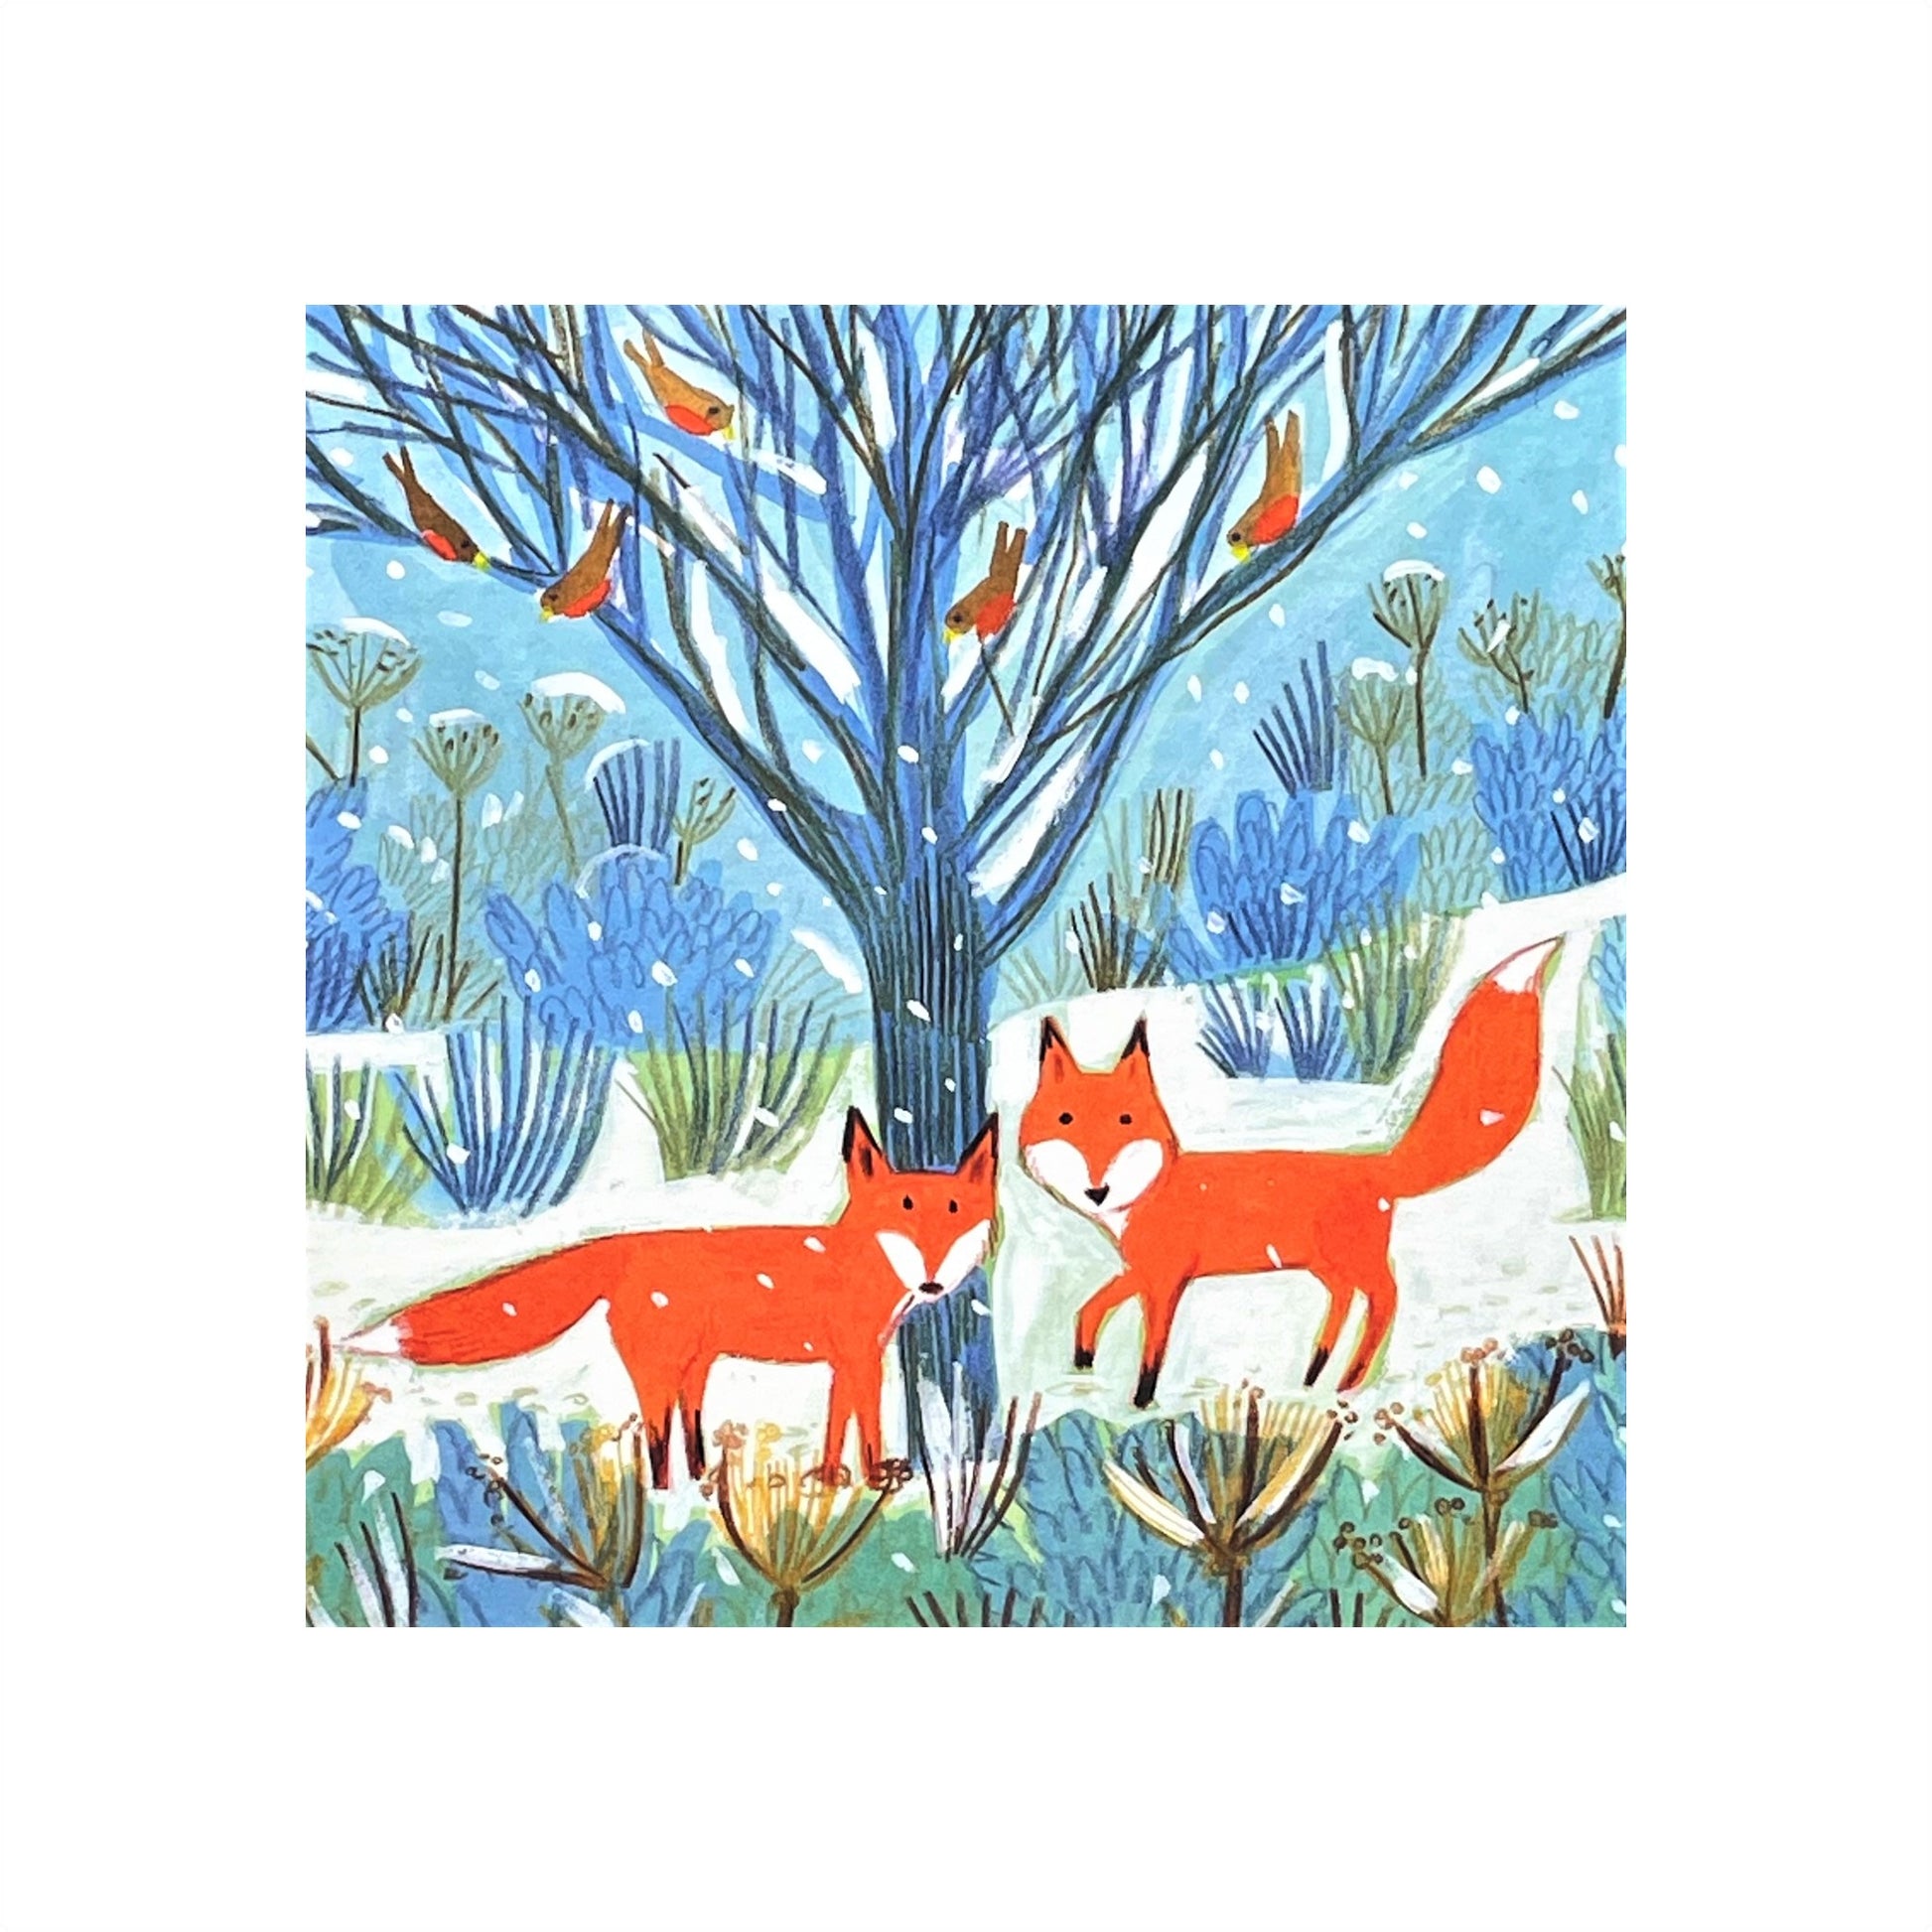 greetings card showing two bright orange foxes under a tree with robins in a snowy landscape